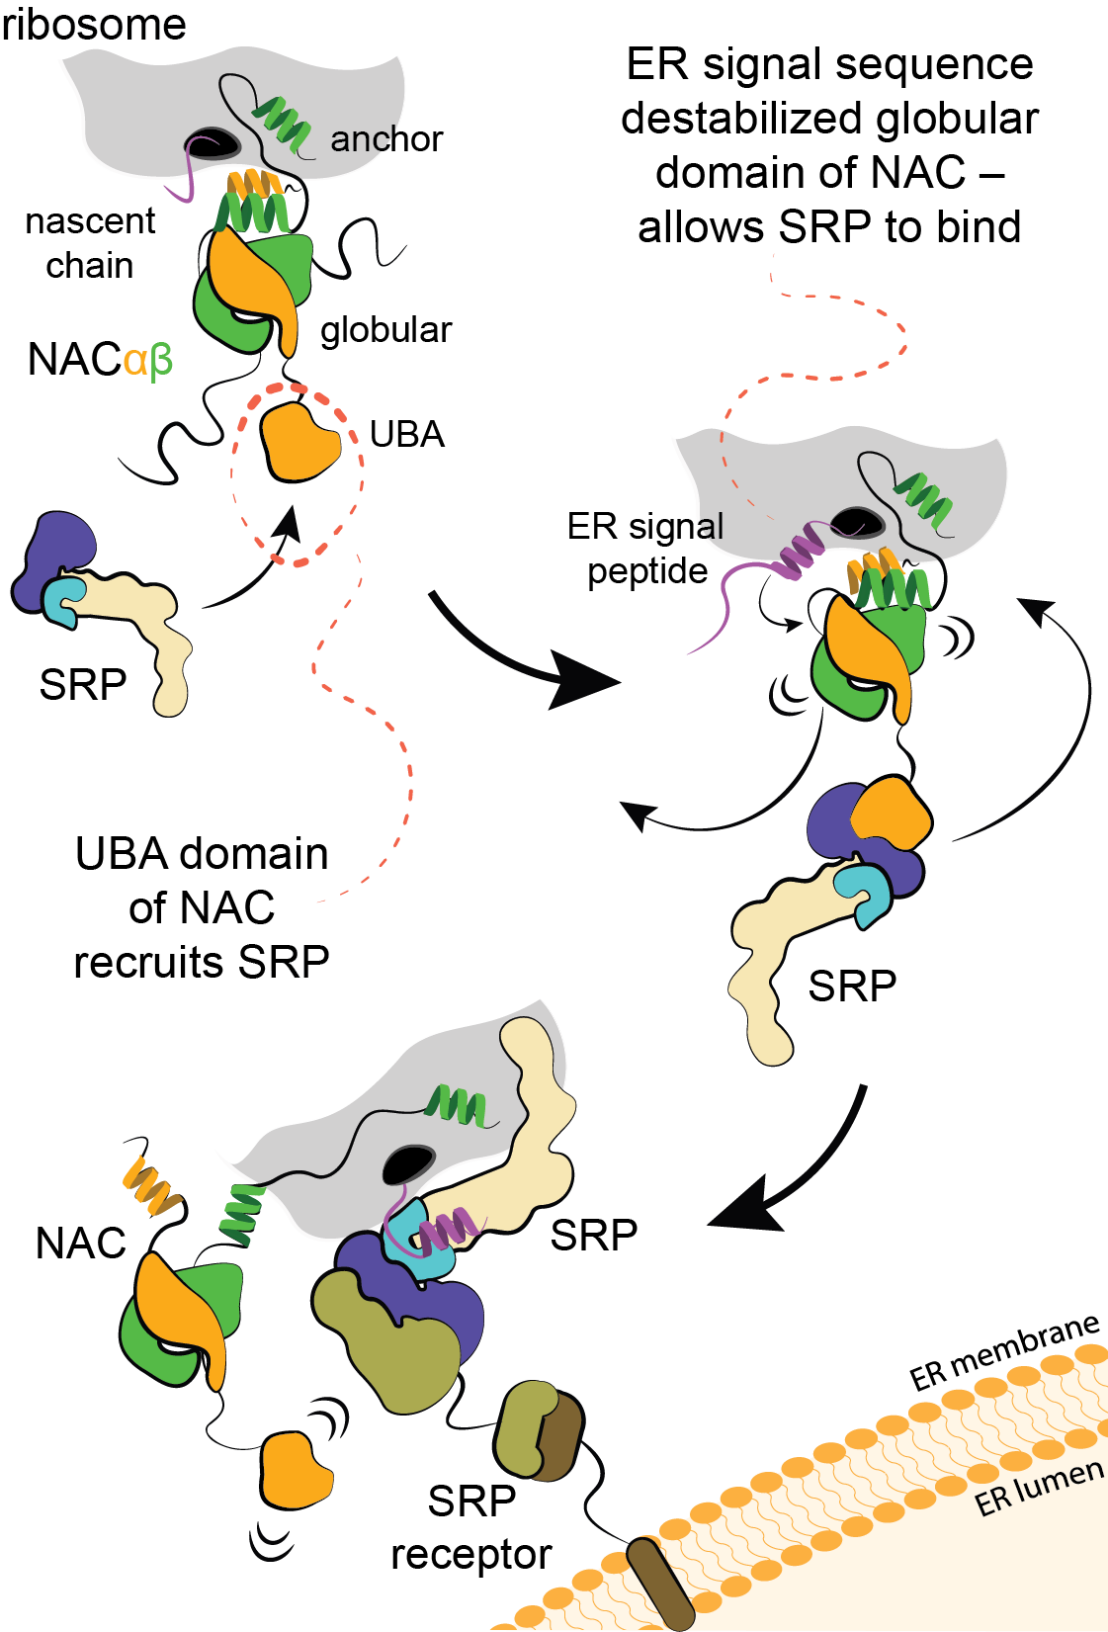 Schematic depiction of SRP to the ribosome mediated by the UBA domain of NAC